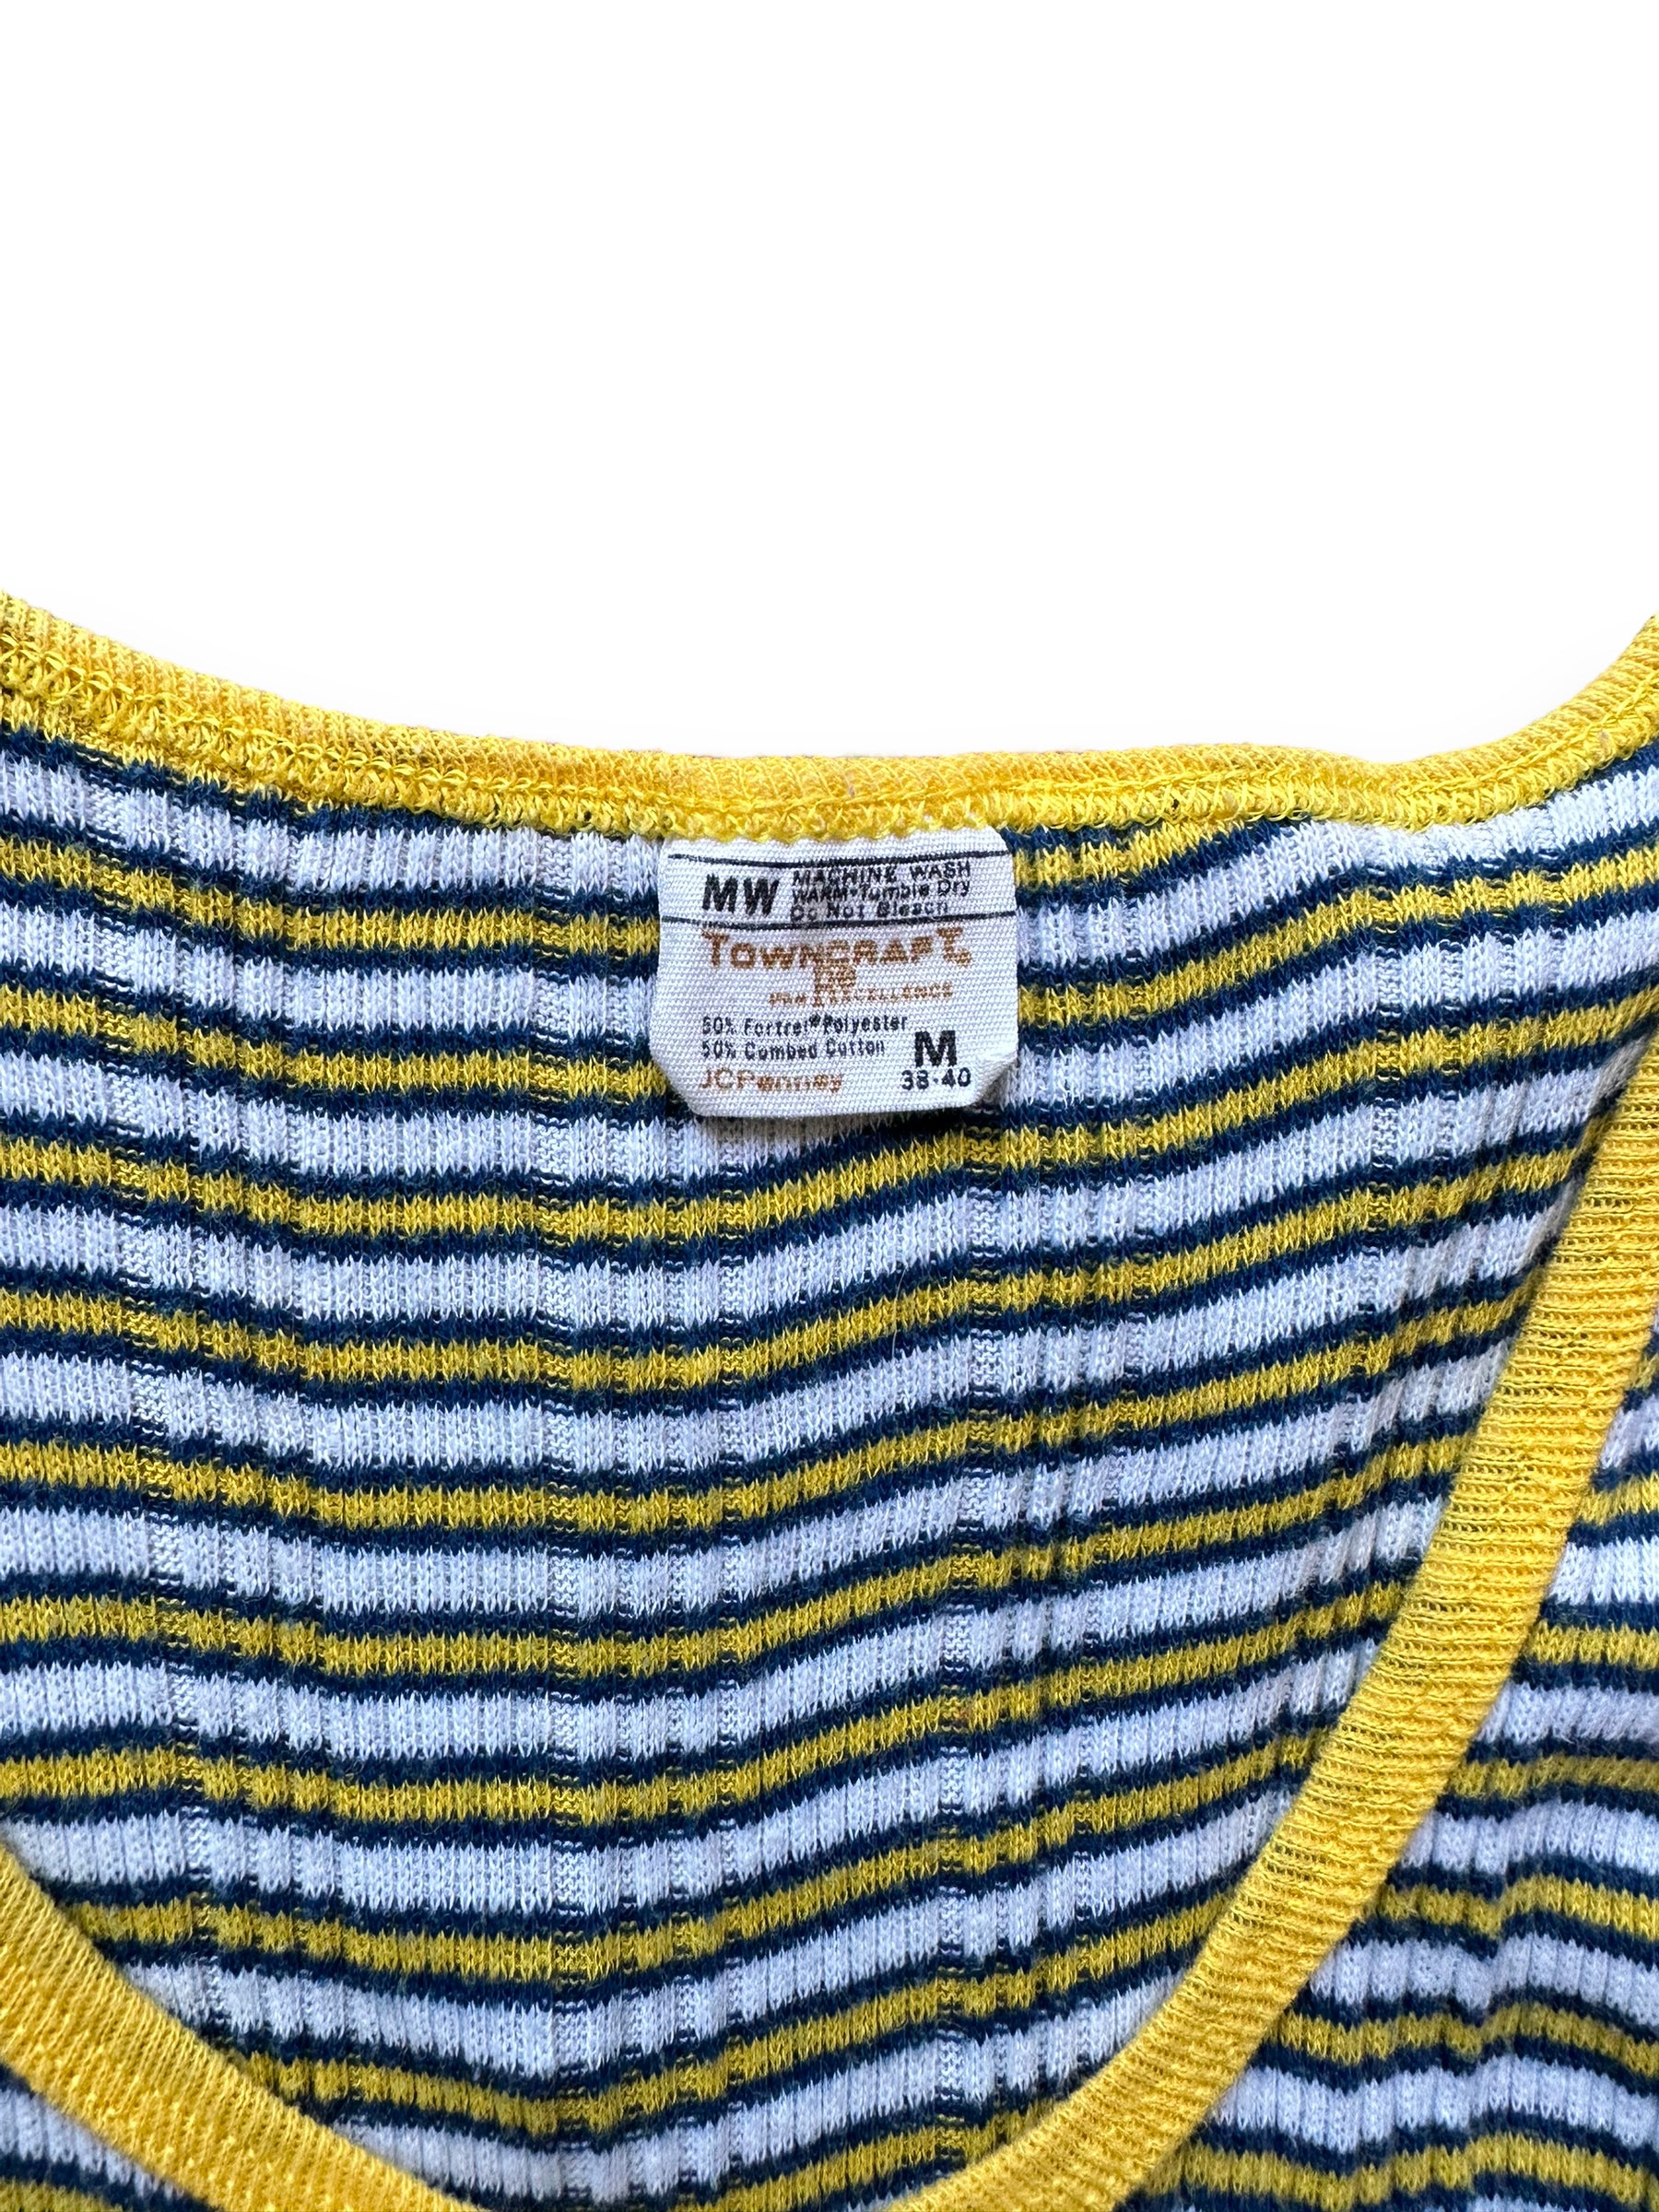 Tag View of Vintage Towncraft Striped Tank Top SZ M | Vintage Tank Top Shirts Seattle | Barn Owl Vintage Tees Seattle